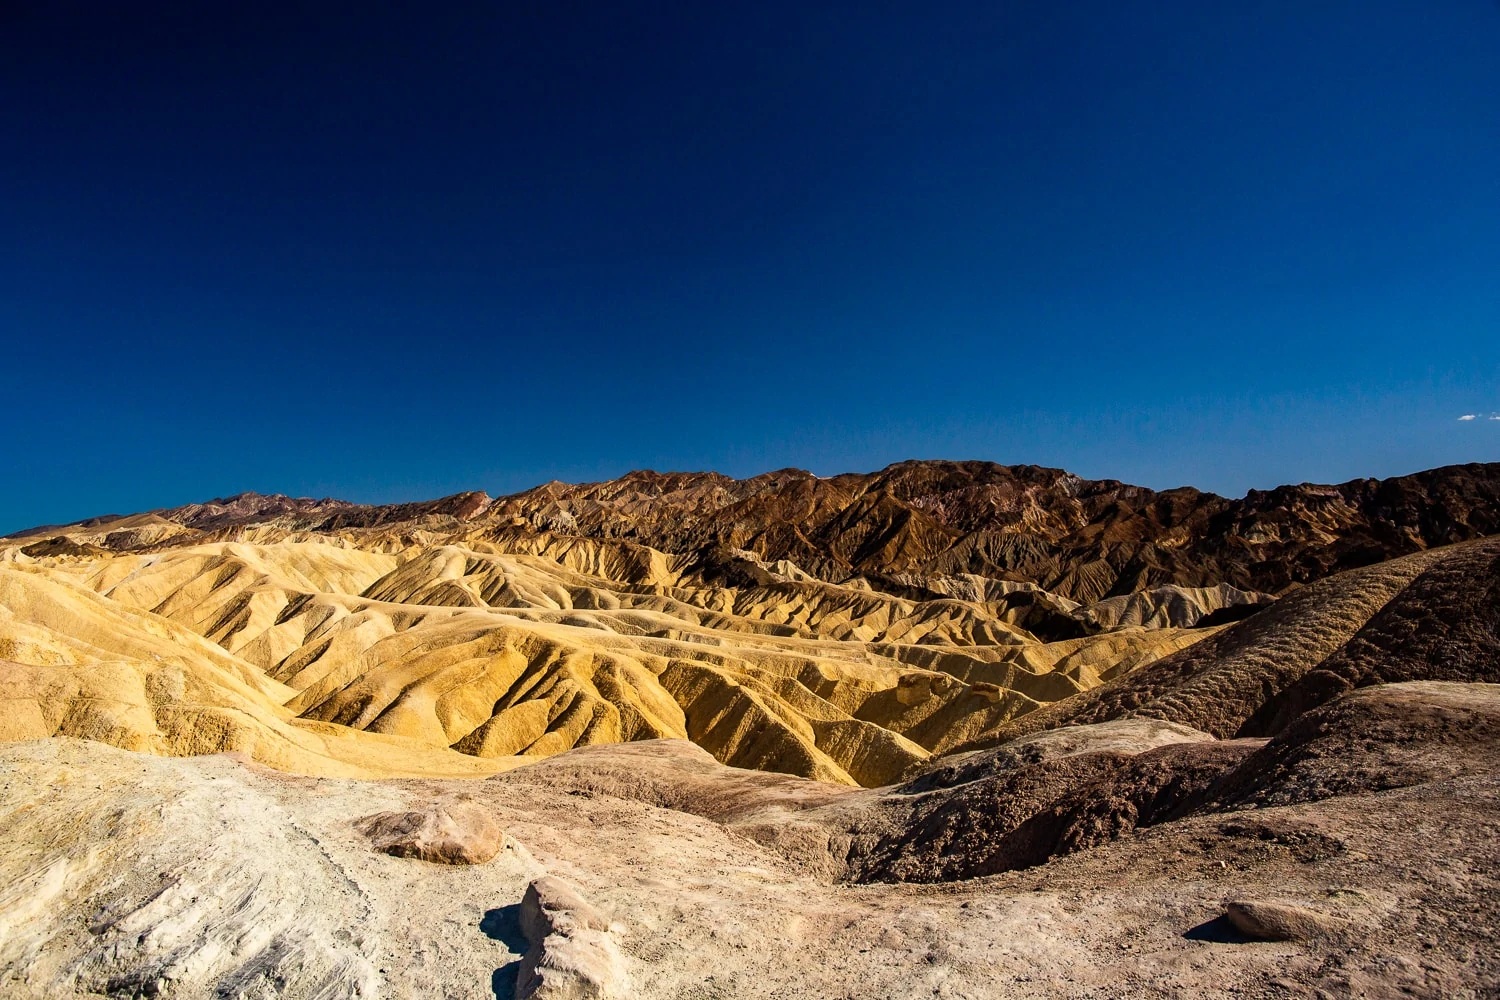 A colorful photos of yellow rolling hills at Zabriskie point in Death Valley